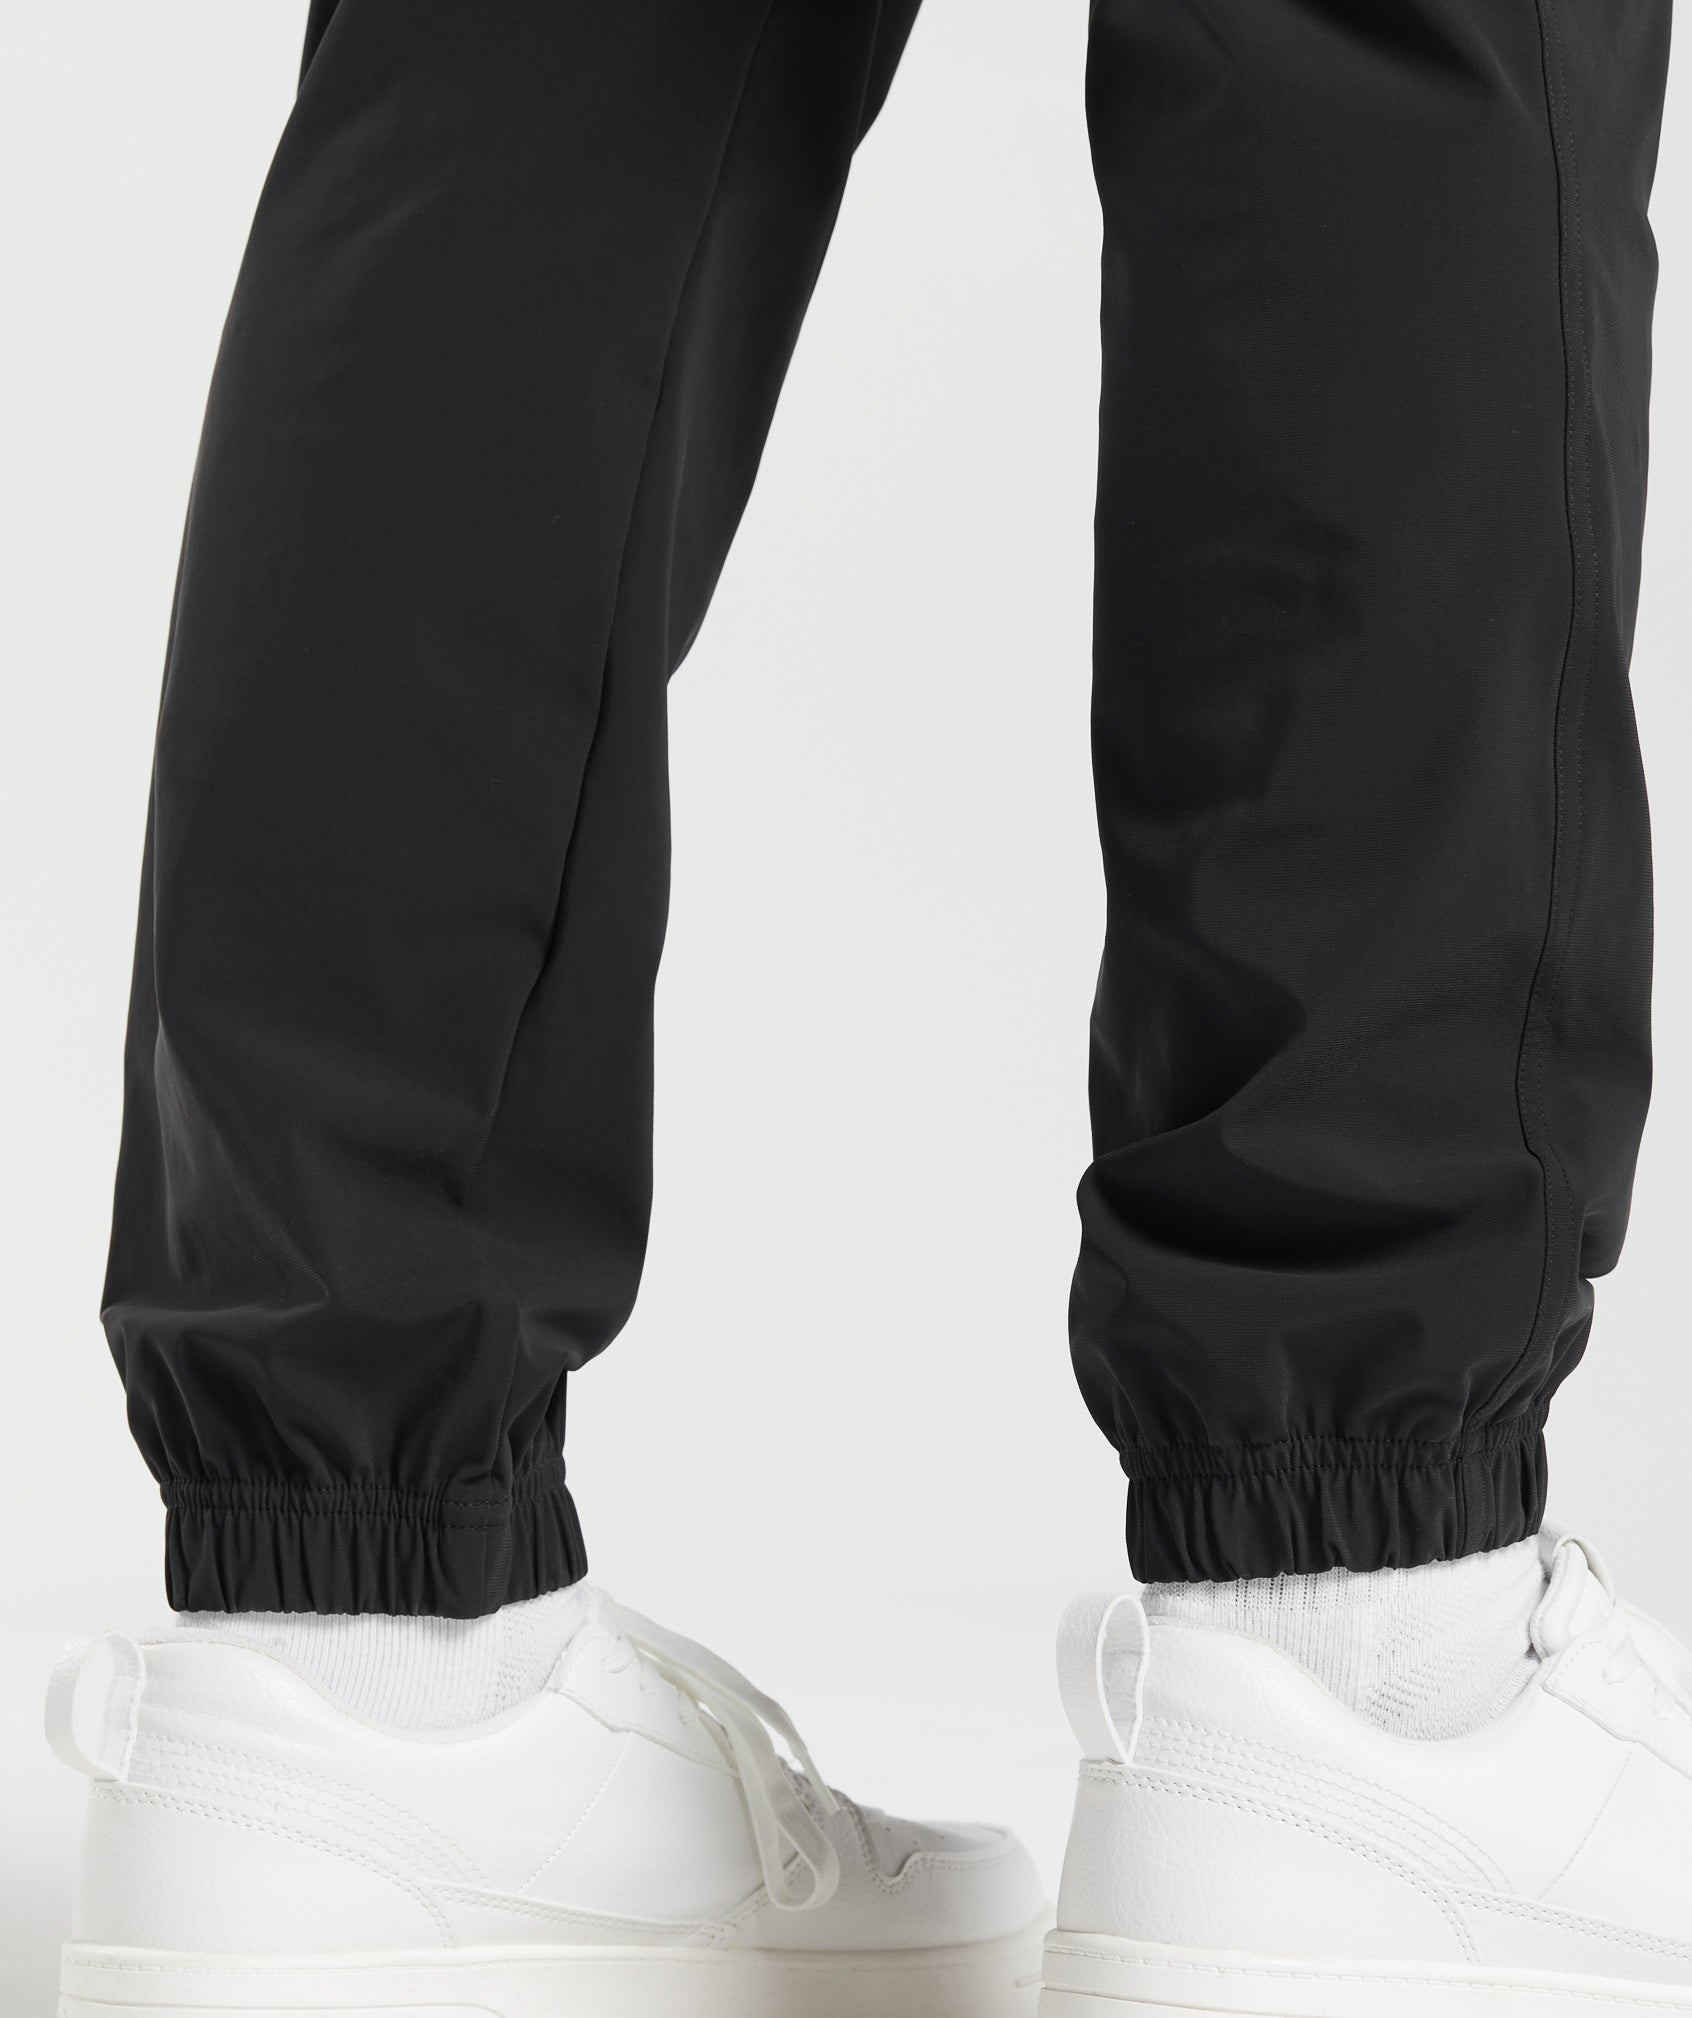 Rest Day Cargo Pants in Black - view 6